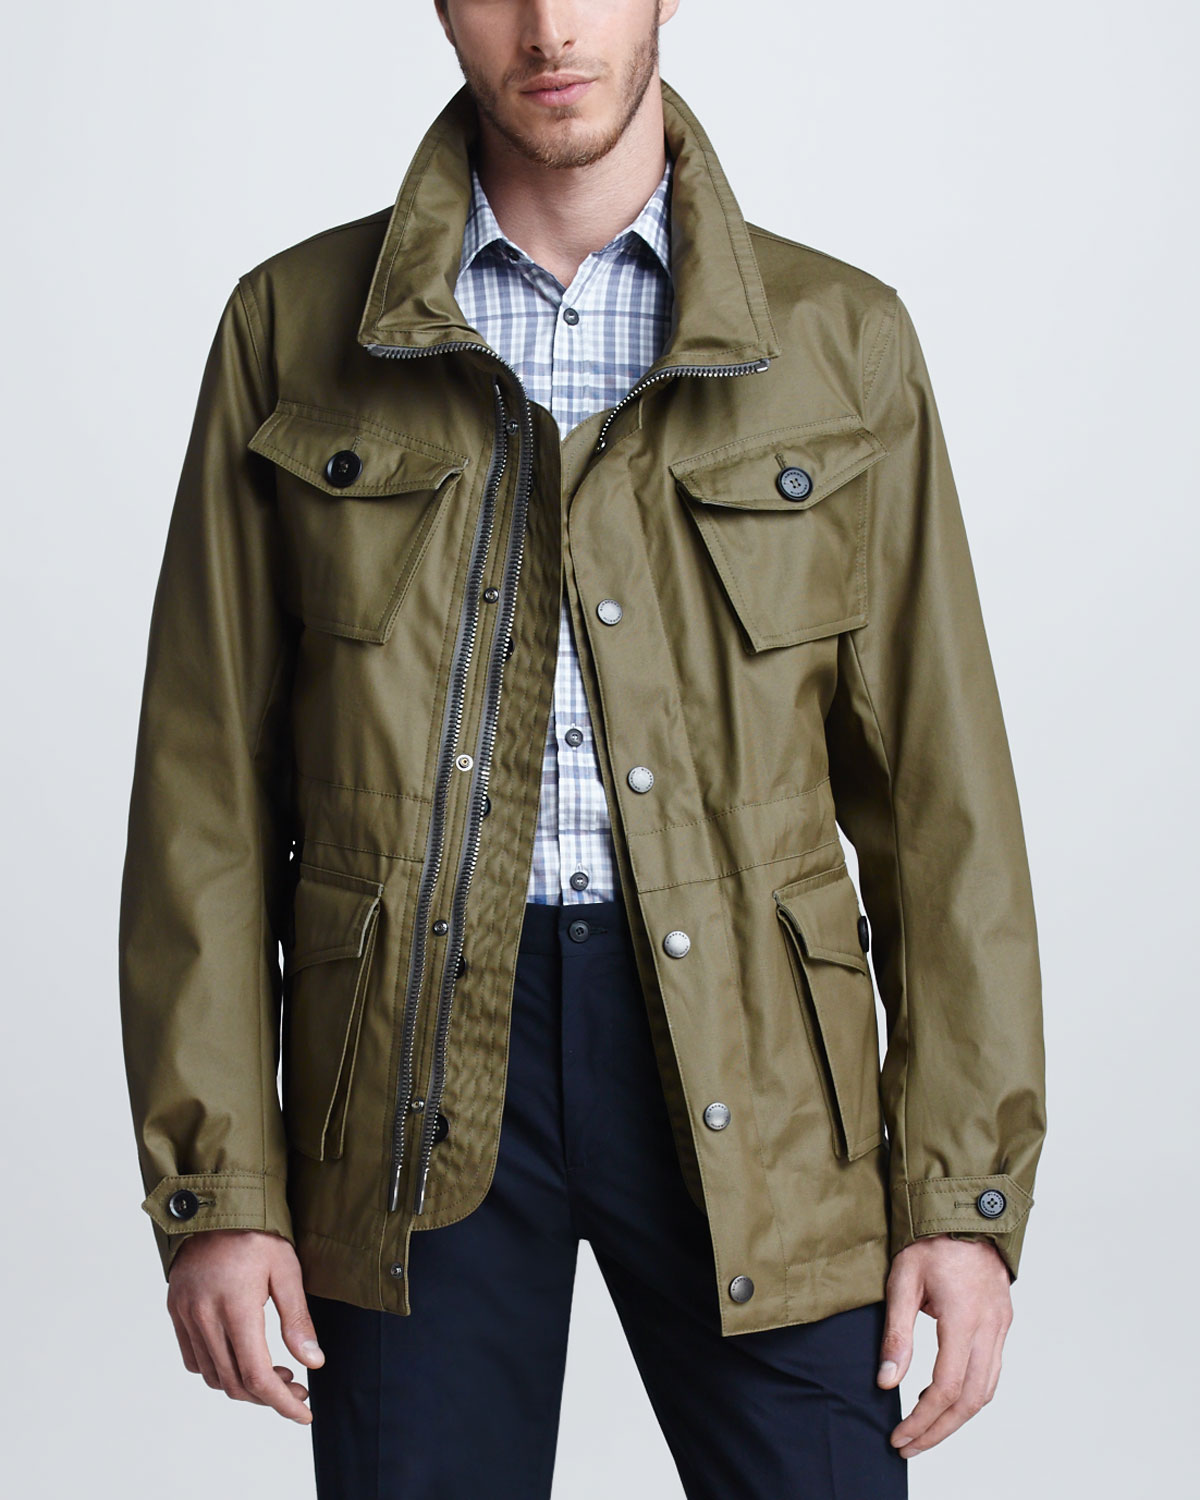 Lyst - Burberry Prorsum Canvas Drop Funnel Collar Jacket in Natural for Men